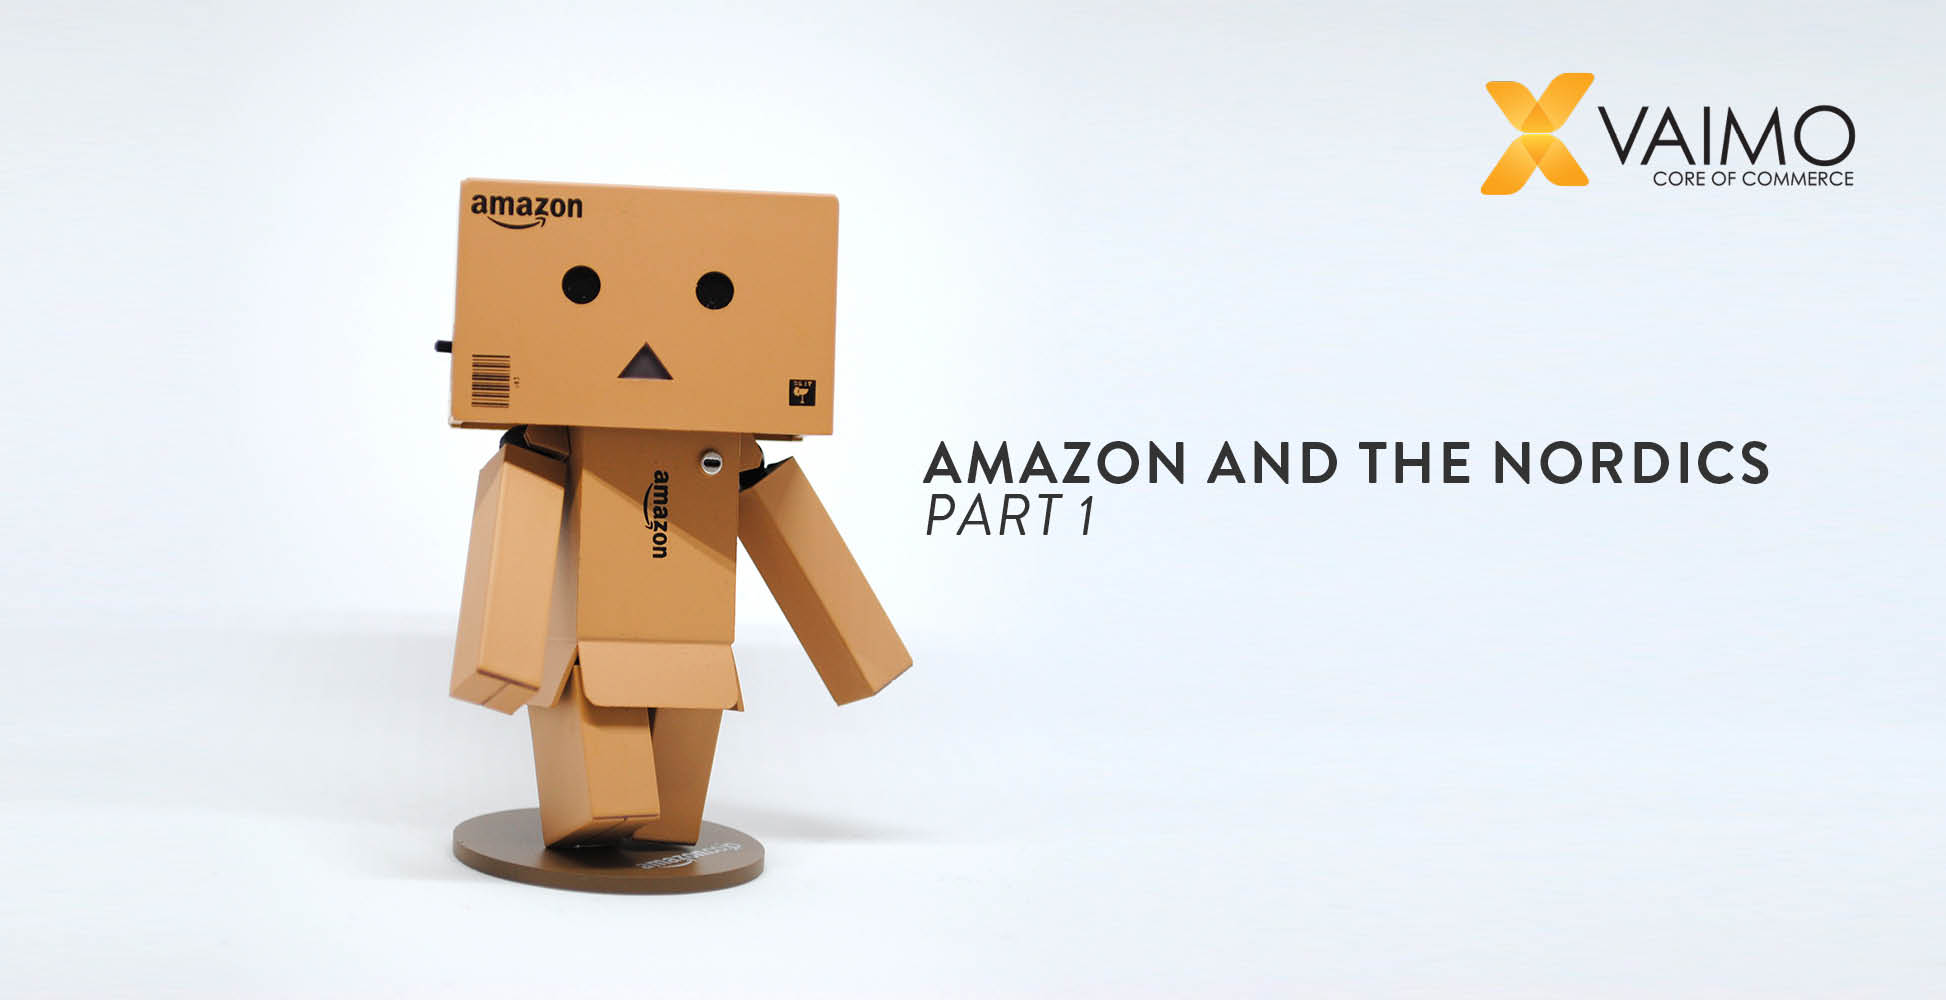 Amazon and The Nordics - Part 1